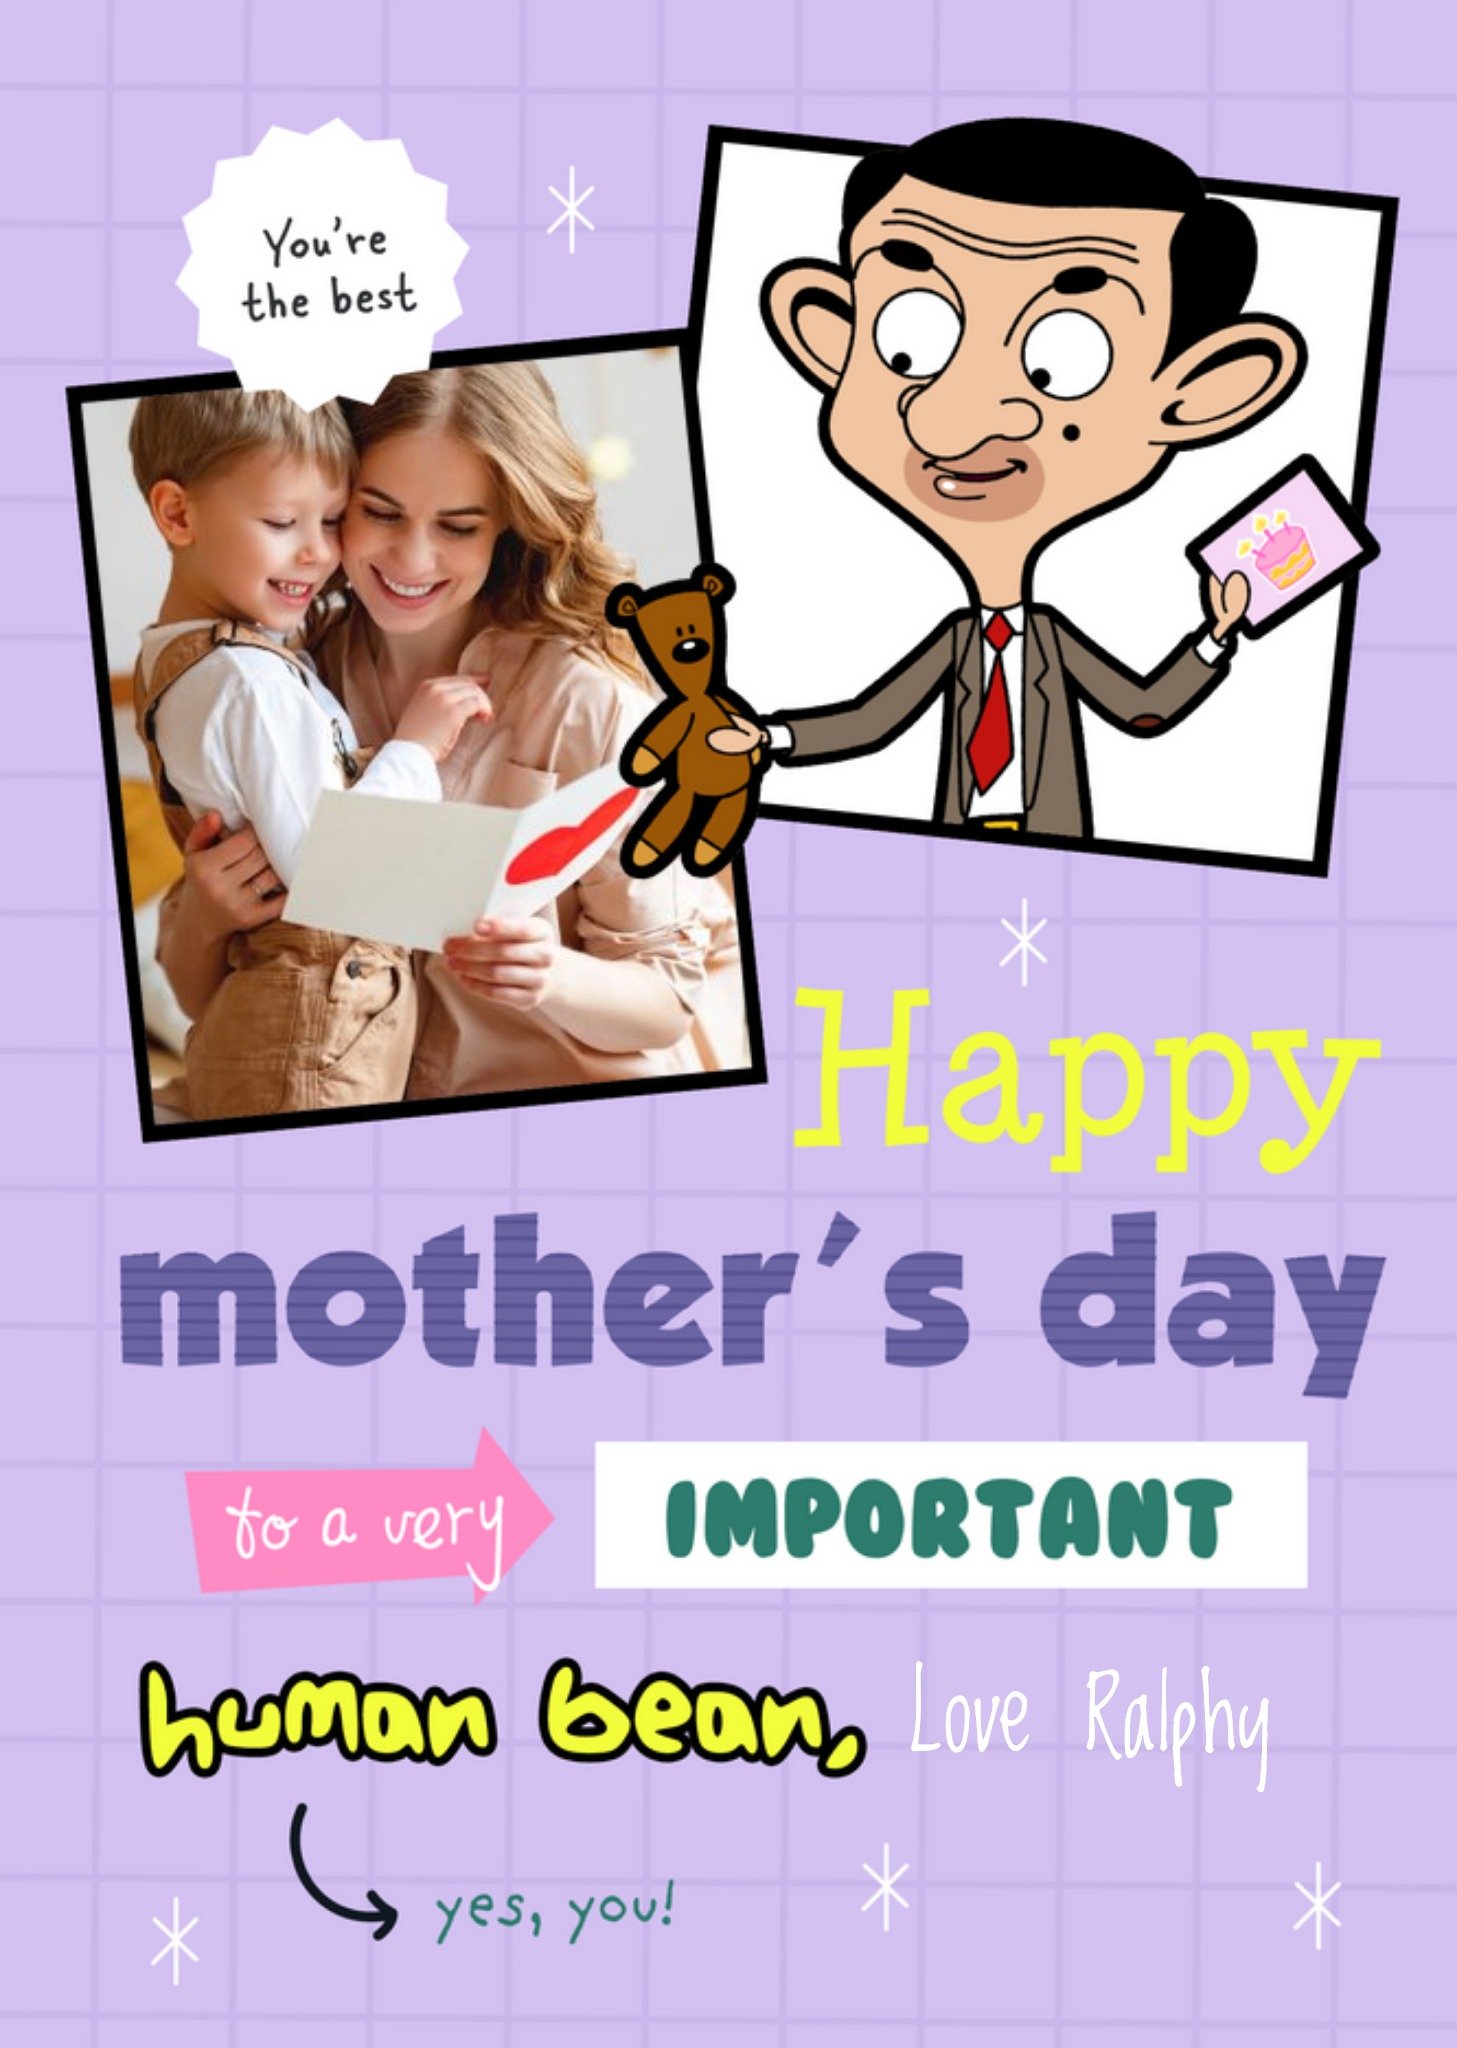 Moonpig Mr Bean Happy Mothers Day To A Very Important Human Bean Photo Upload Card Ecard